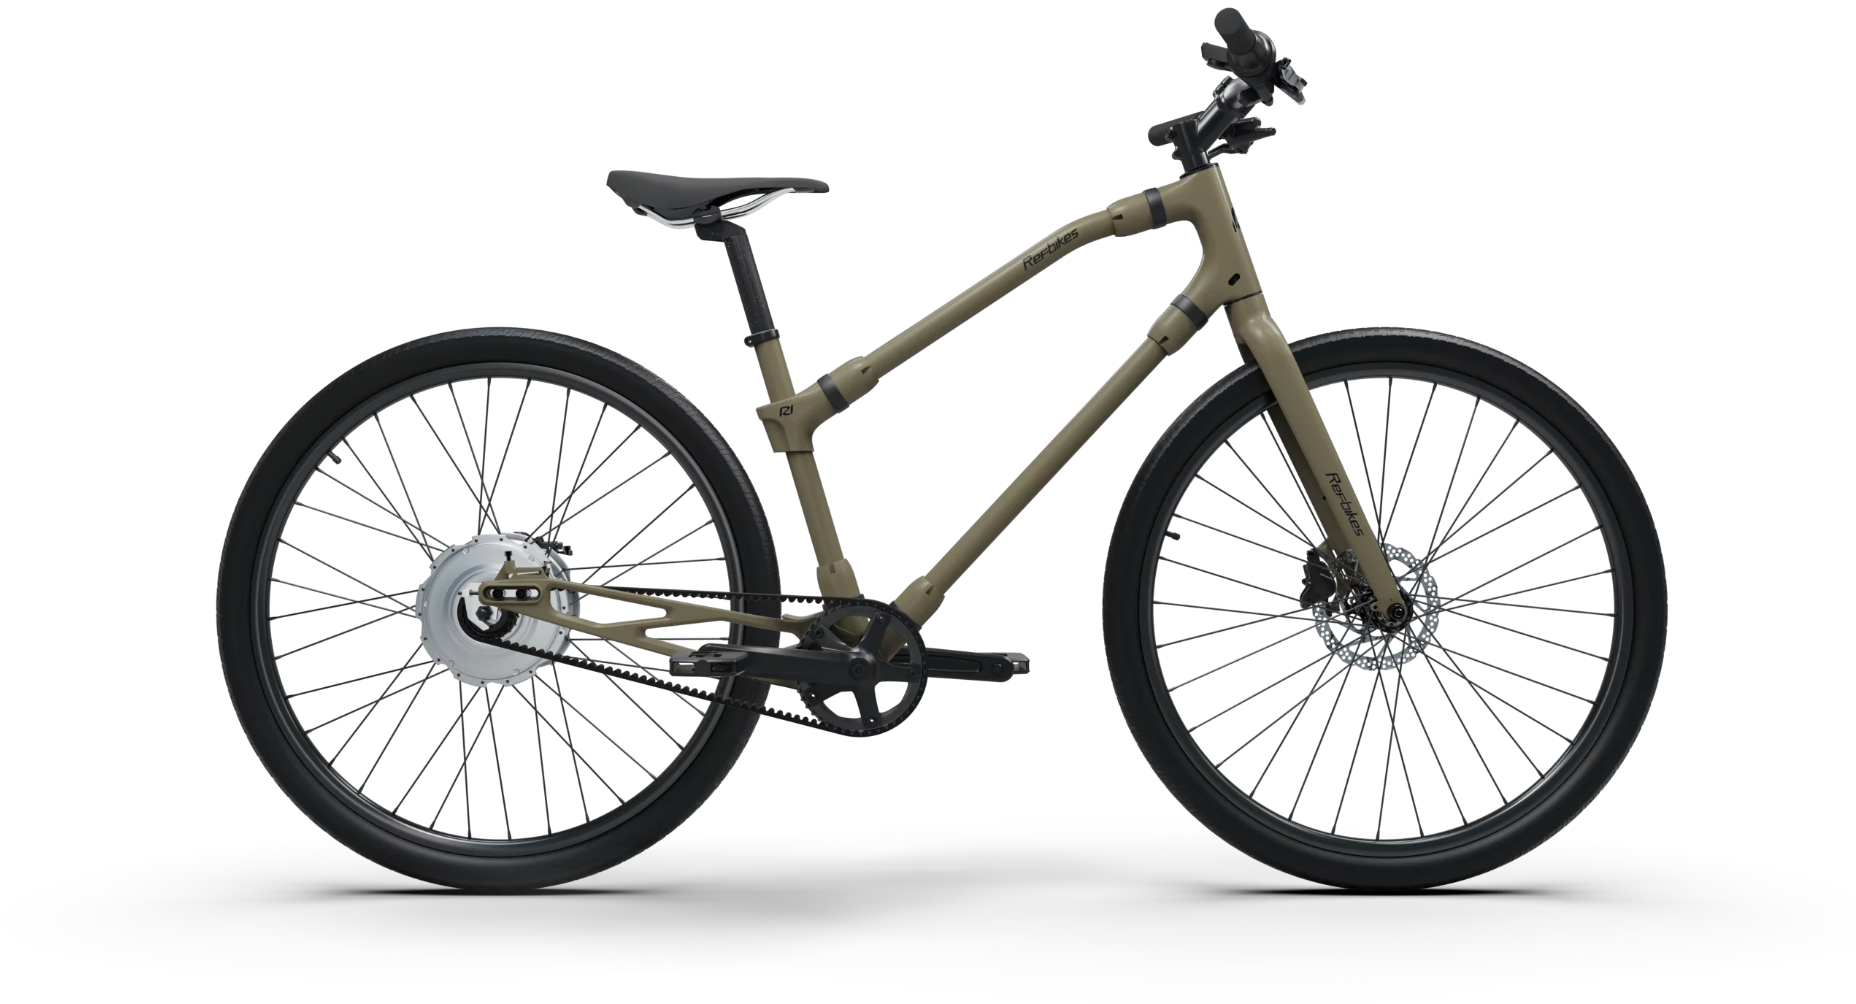 Minimalist sand-colored Essential Boost bike, combining elegance and functionality for riders.